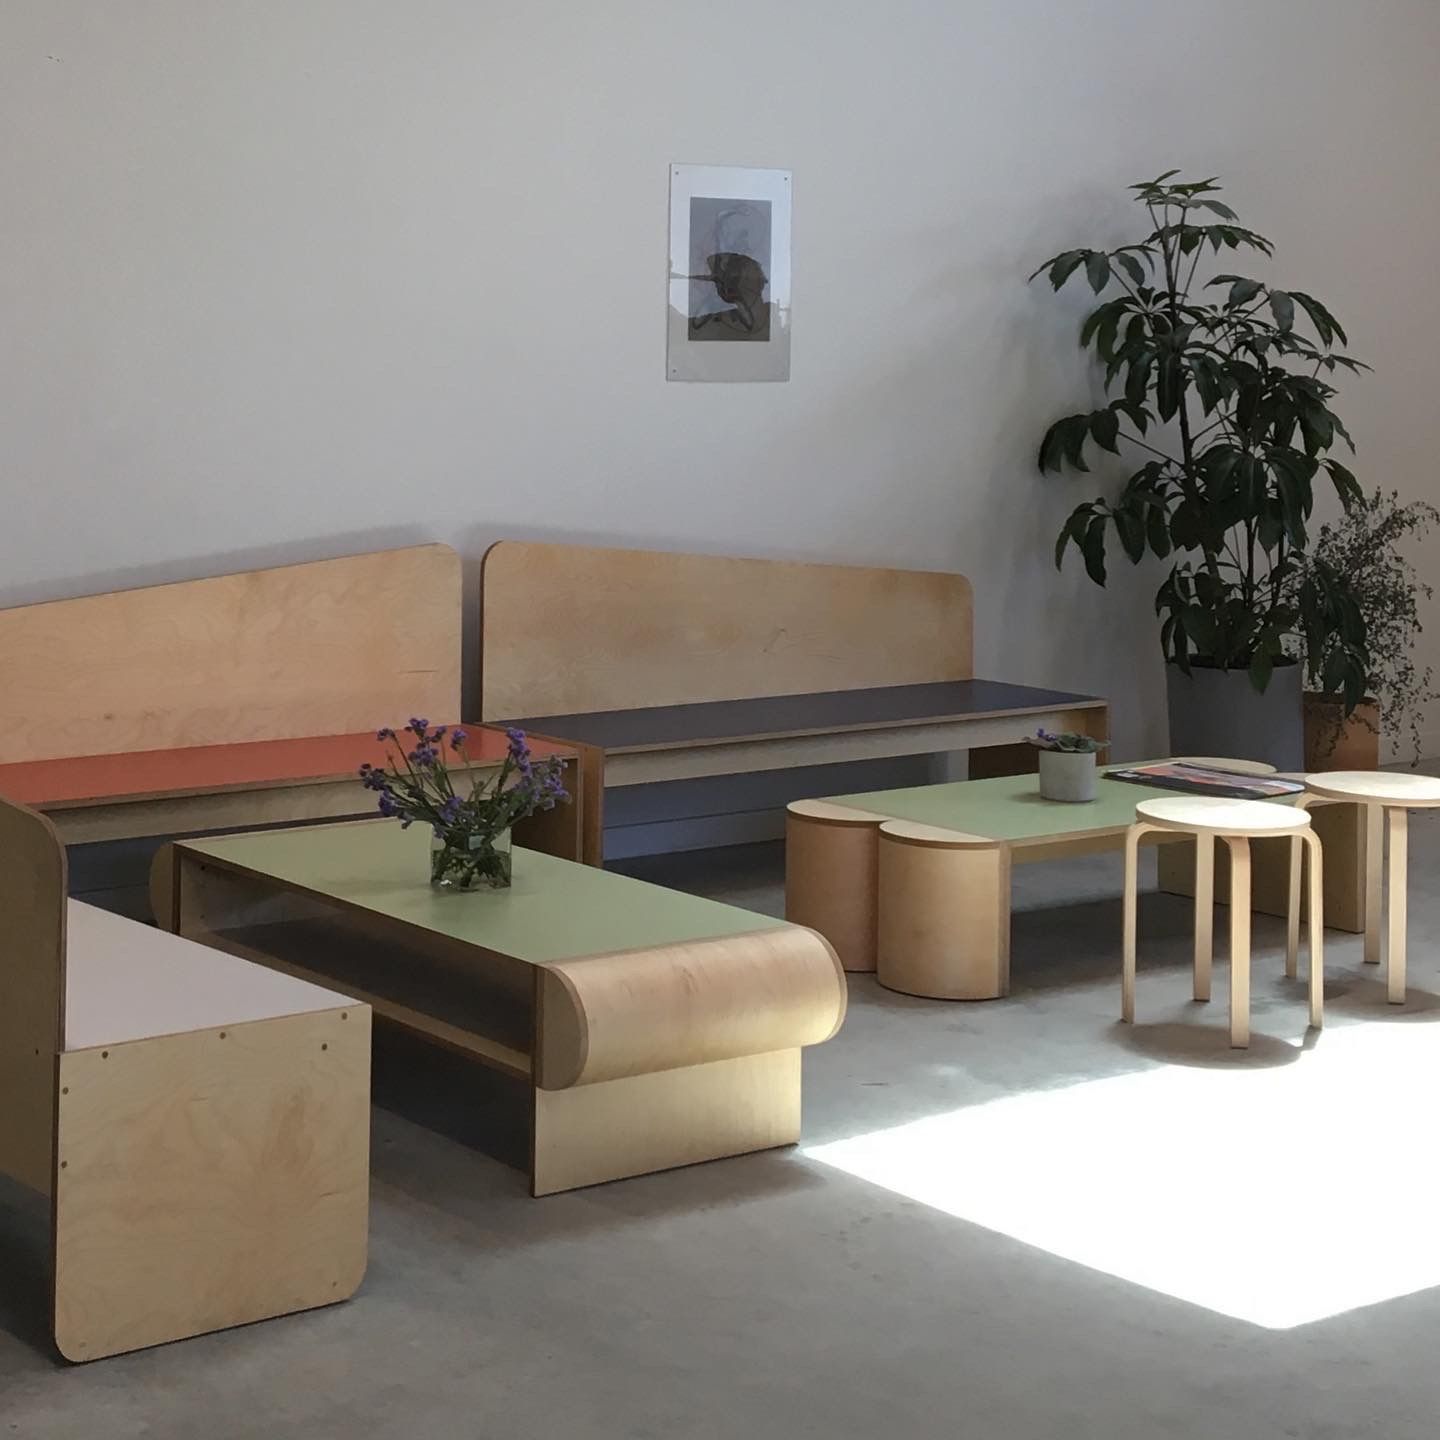  Bench and Table set - Murmurs Gallery product image 0